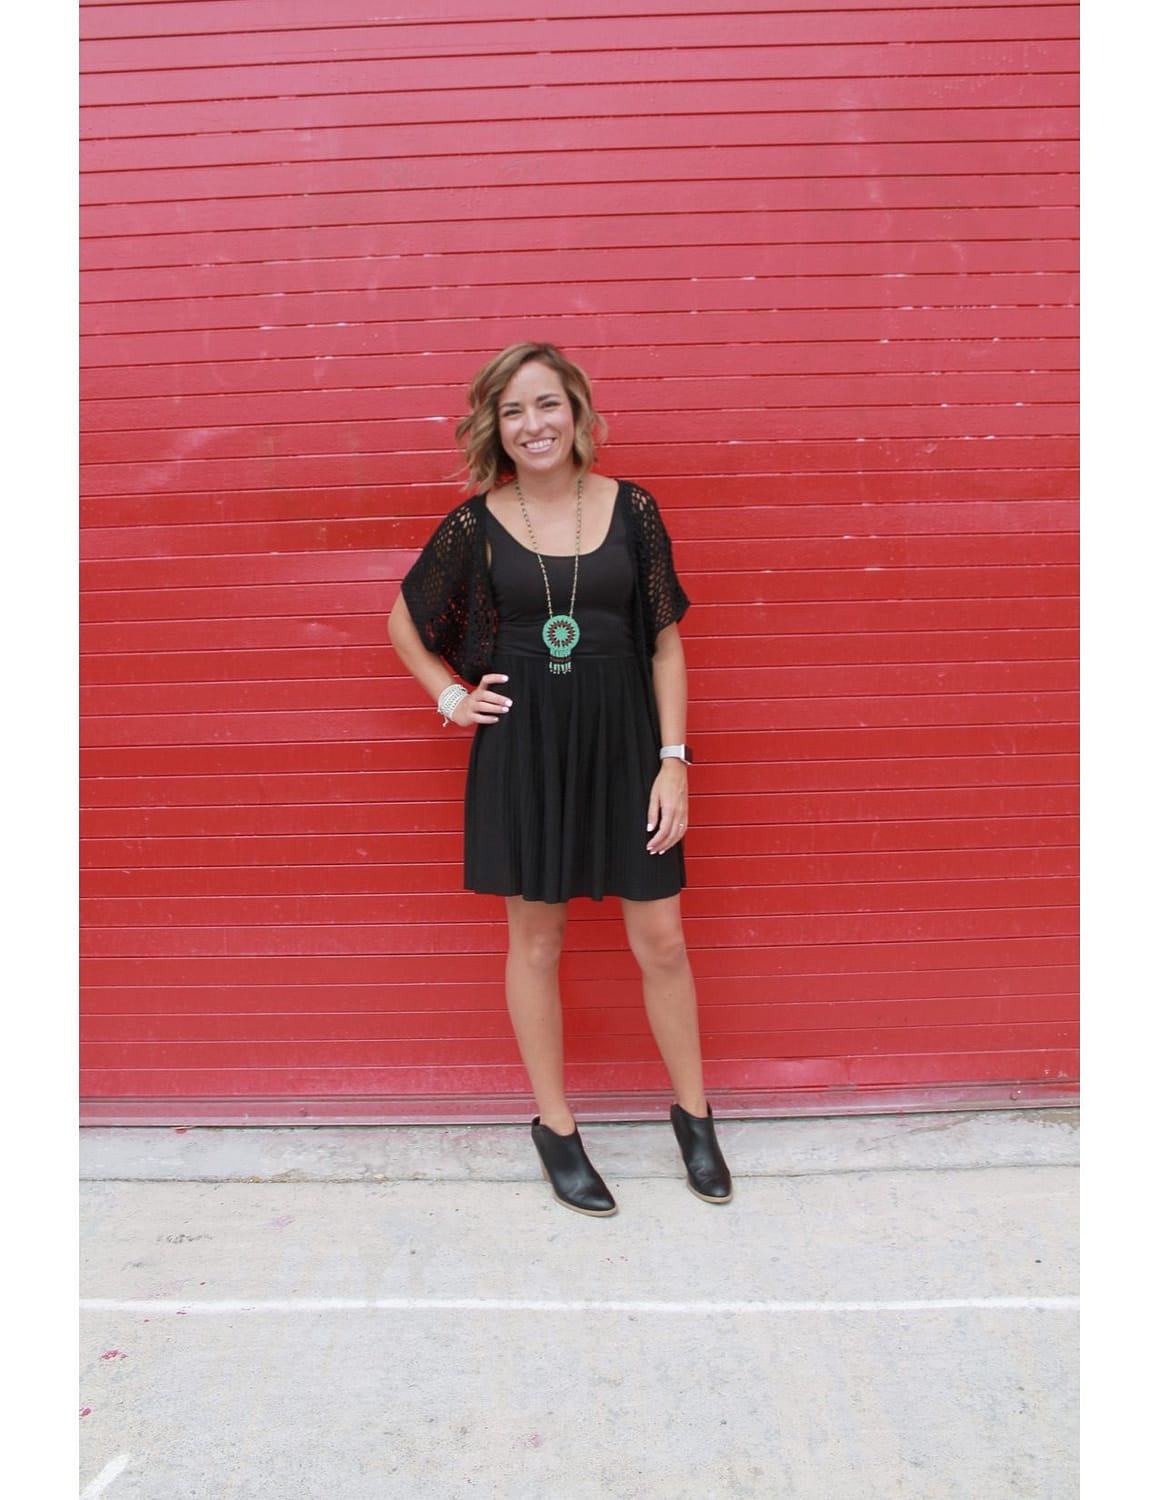 peggy marshall in all black posing in front of a red outdoor wall